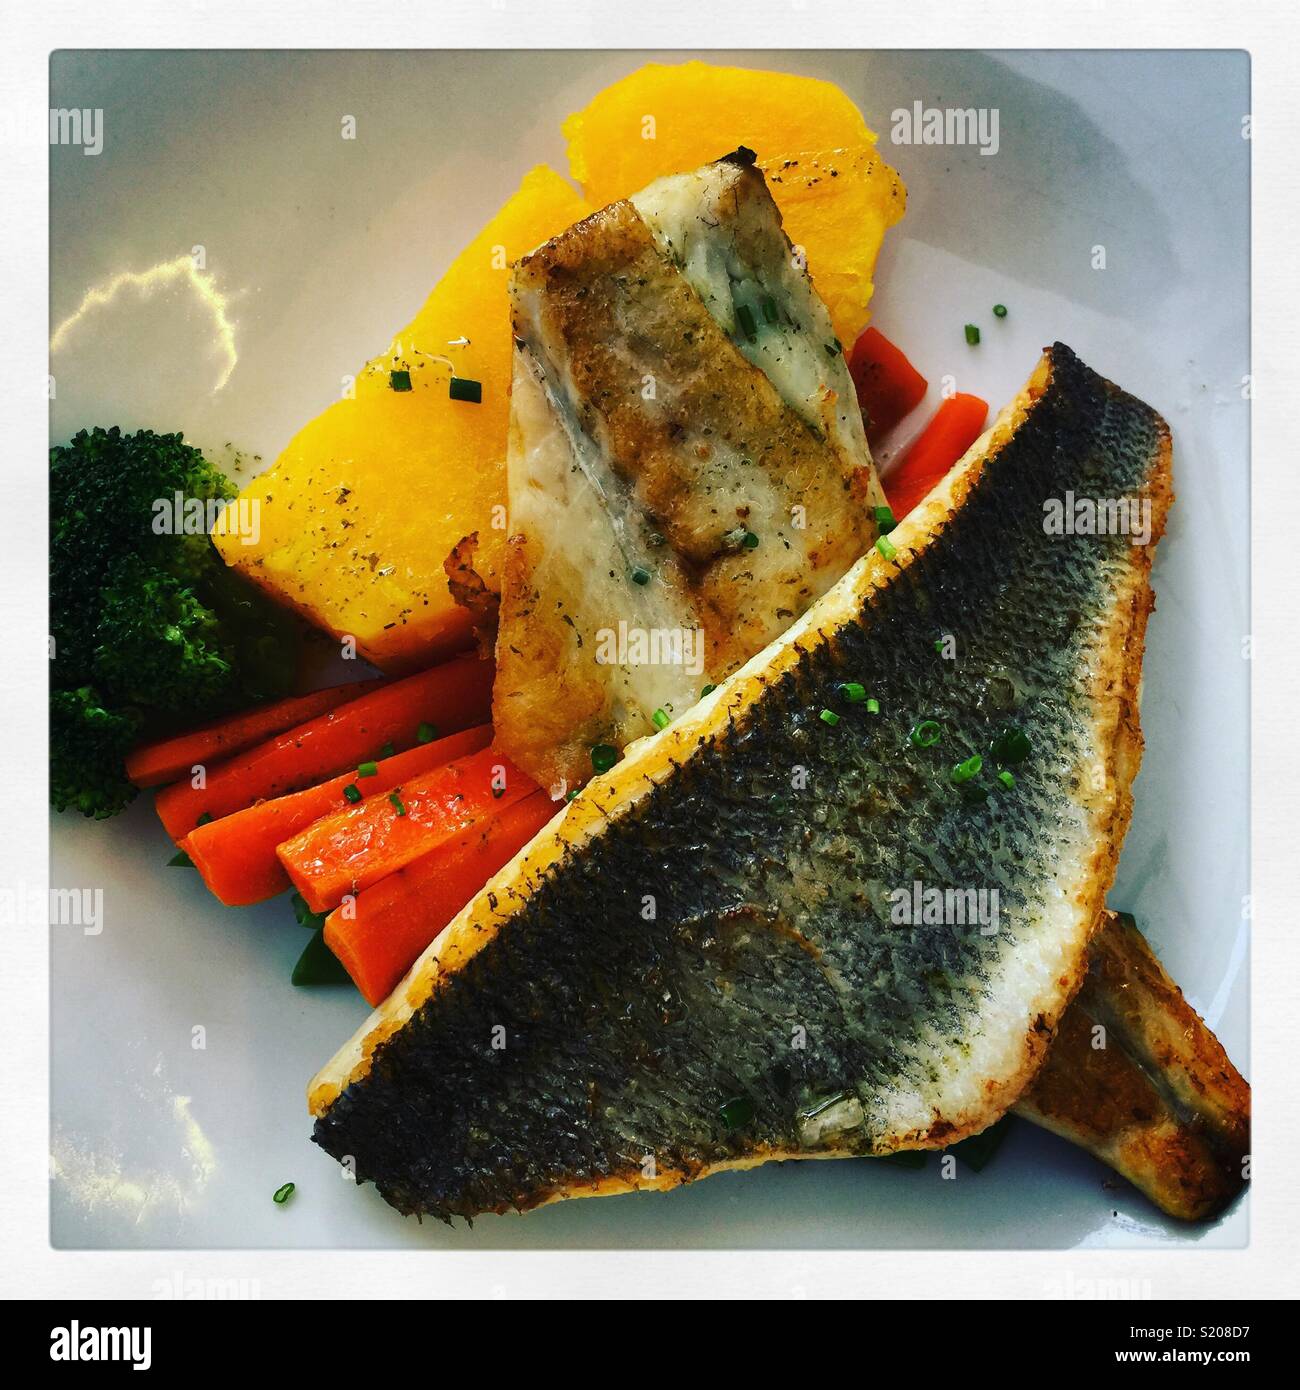 Sea bass and vegetables Stock Photo